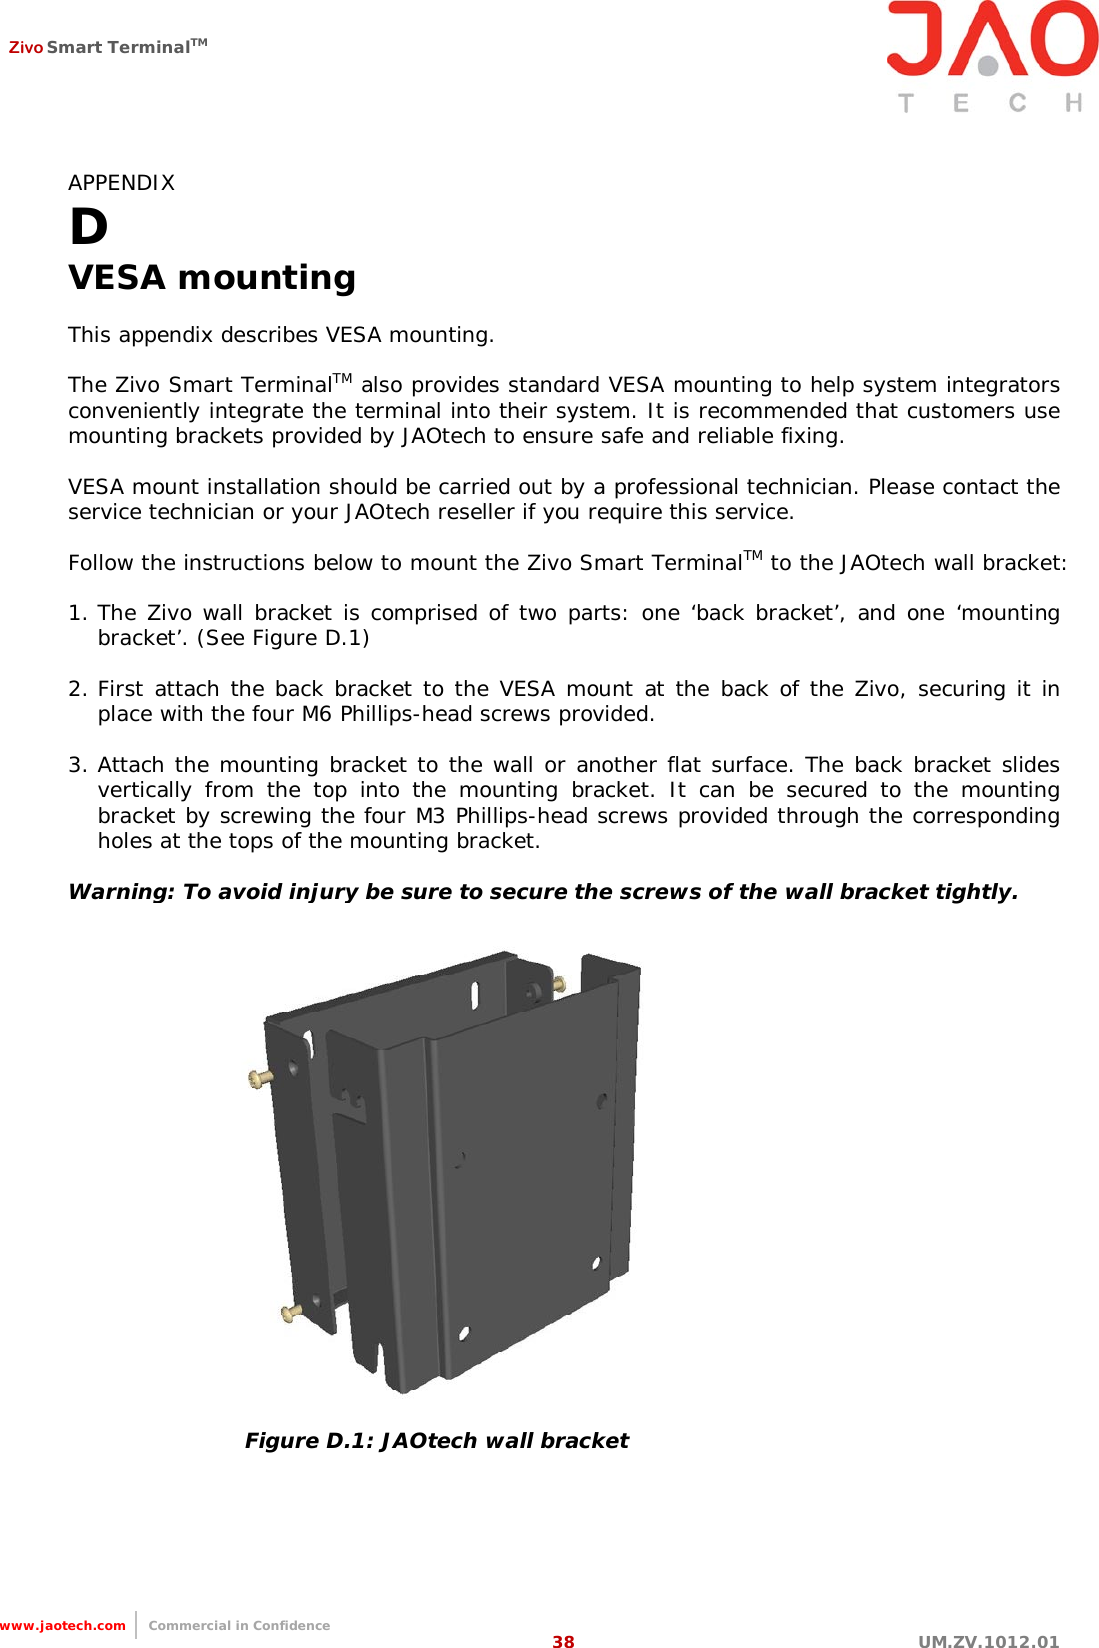  Zivo Smart TerminalTM   38 UM.ZV.1012.01                                                                  www.jaotech.com     Commercial in Confidence APPENDIX D VESA mounting  This appendix describes VESA mounting.  The Zivo Smart TerminalTM also provides standard VESA mounting to help system integrators conveniently integrate the terminal into their system. It is recommended that customers use mounting brackets provided by JAOtech to ensure safe and reliable fixing.  VESA mount installation should be carried out by a professional technician. Please contact the service technician or your JAOtech reseller if you require this service.  Follow the instructions below to mount the Zivo Smart TerminalTM to the JAOtech wall bracket:  1. The  Zivo wall  bracket is comprised of two parts: one ‘back bracket’, and one ‘mounting bracket’. (See Figure D.1)  2. First attach the  back  bracket to the VESA mount at the back of  the Zivo, securing it in place with the four M6 Phillips-head screws provided.  3. Attach the mounting bracket to the wall or another flat surface. The back bracket slides vertically from  the  top into  the  mounting  bracket.  It  can  be  secured  to  the  mounting bracket  by  screwing the  four  M3  Phillips-head screws provided through the corresponding holes at the tops of the mounting bracket.  Warning: To avoid injury be sure to secure the screws of the wall bracket tightly.  Figure D.1: JAOtech wall bracket   